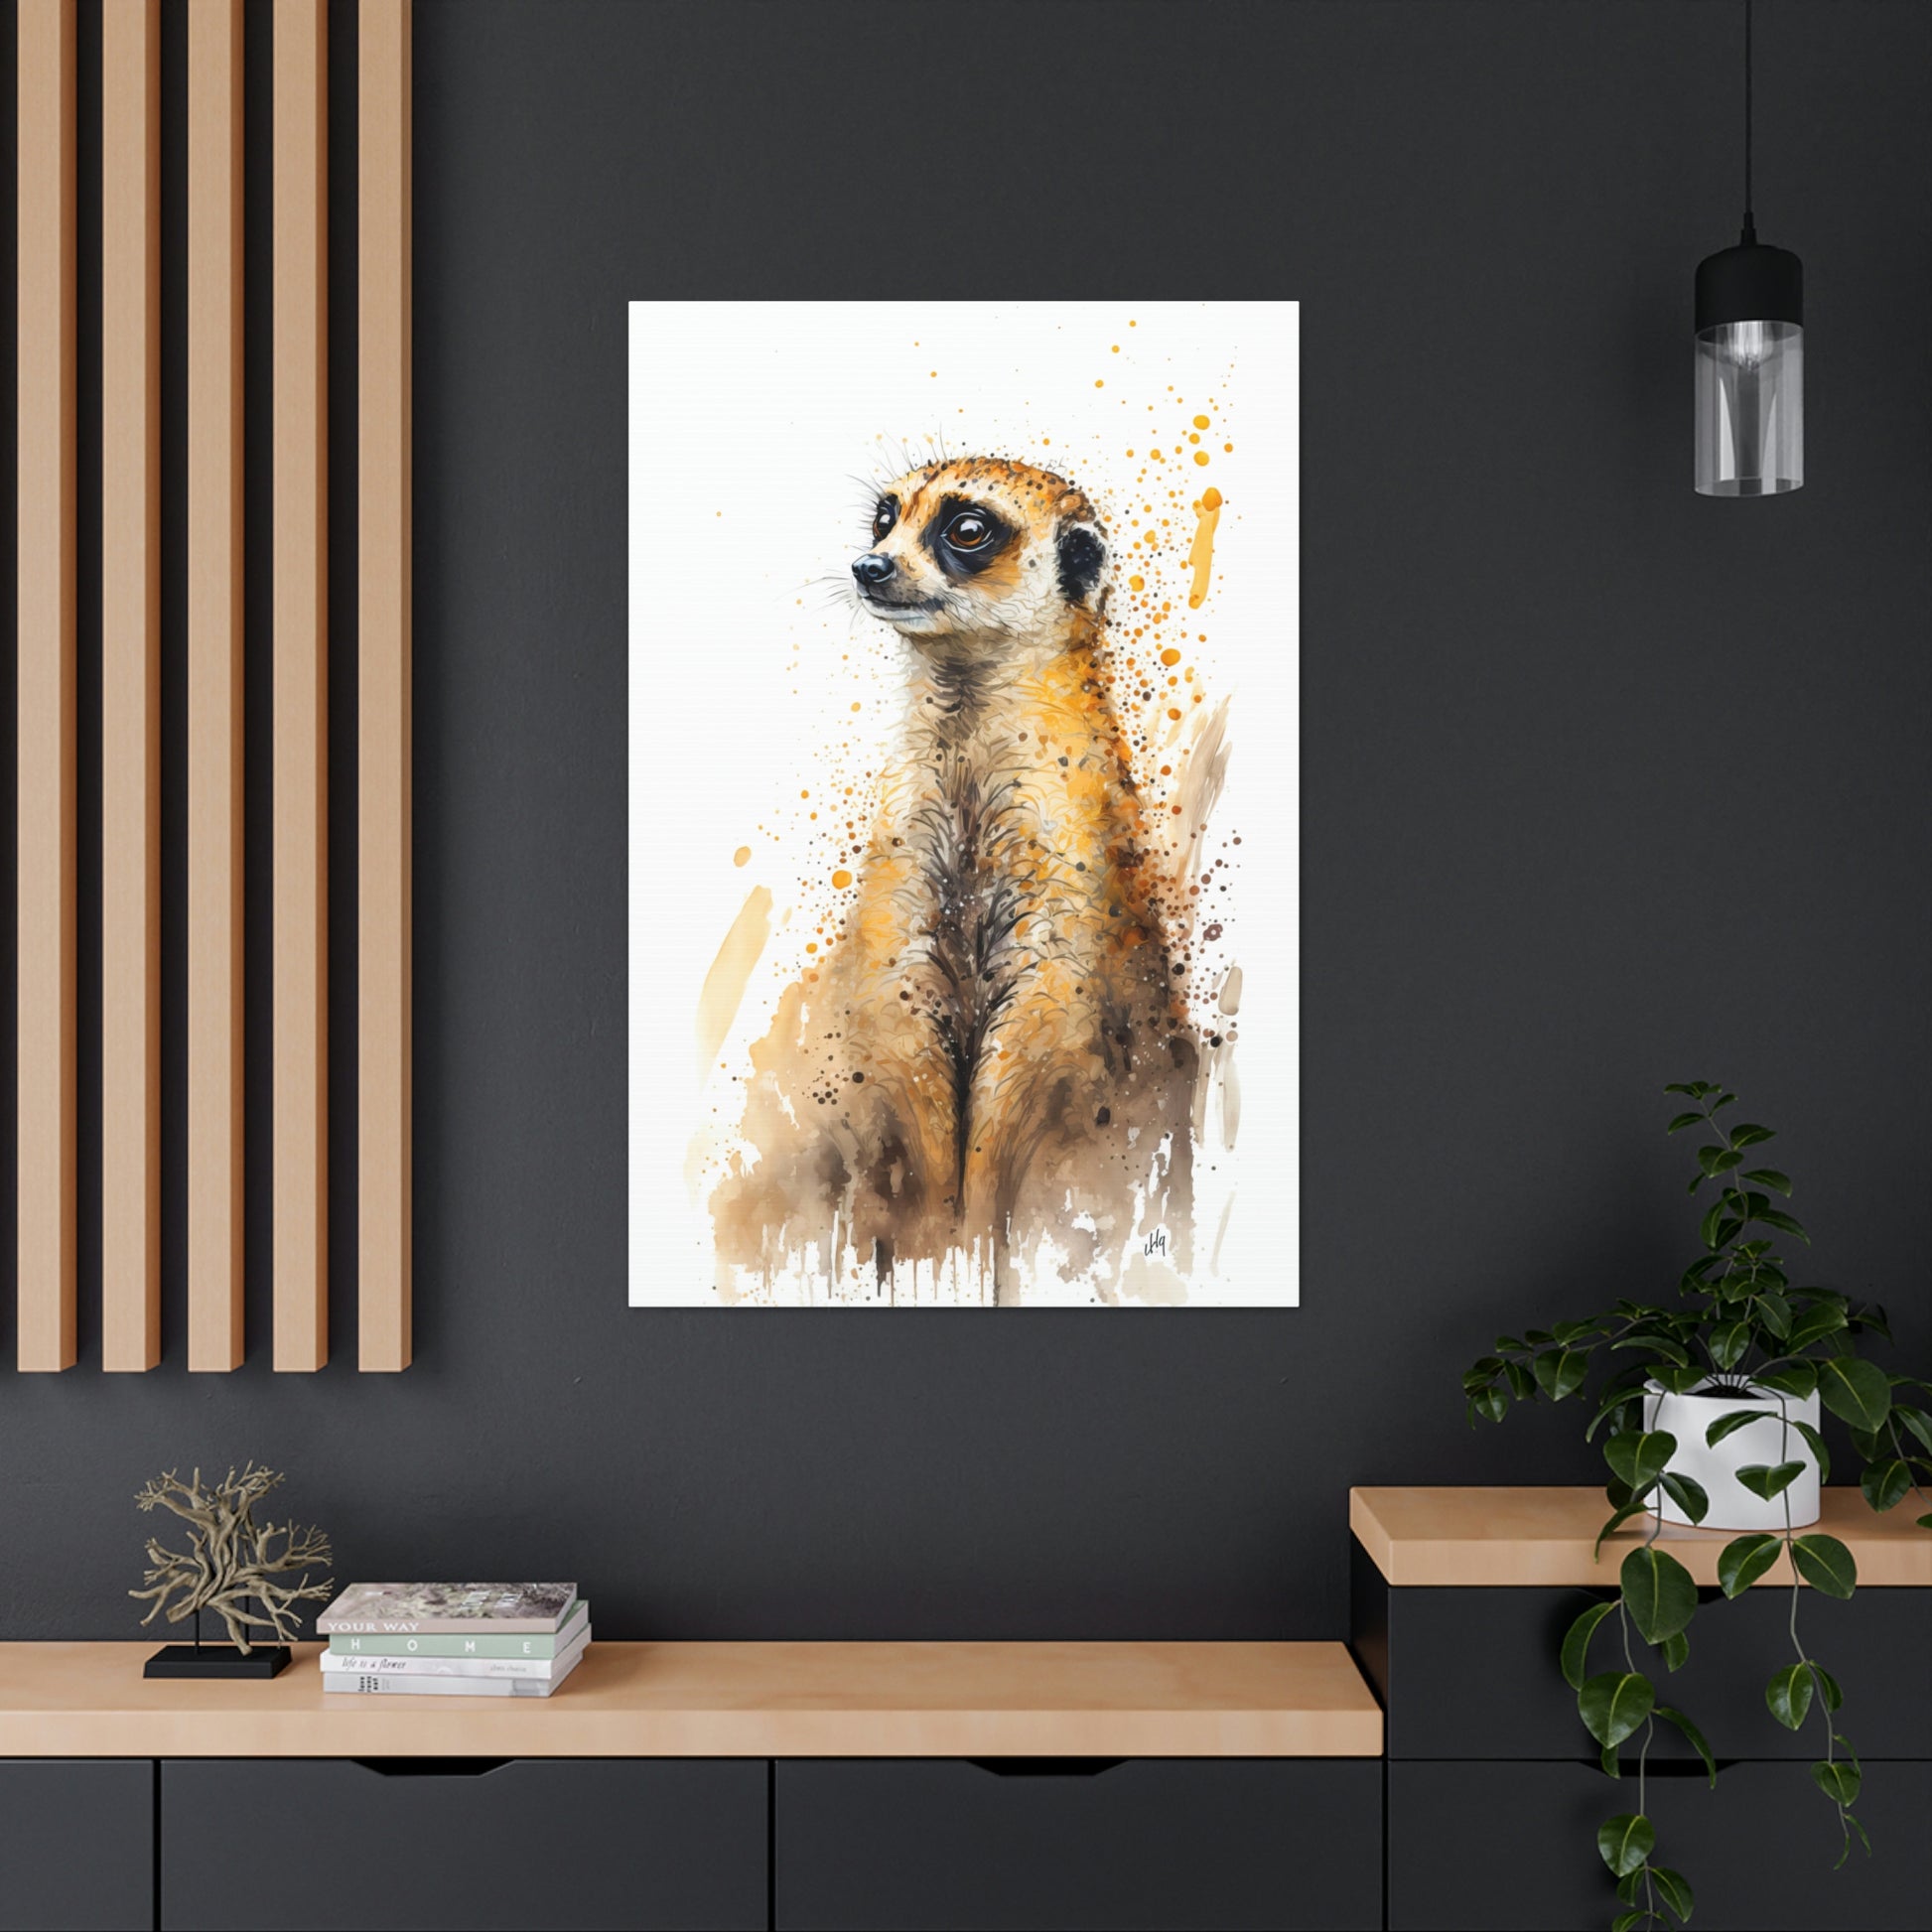 Meerkat Wall Art from the Wildlife Collection, an expressive portrayal on canvas, bringing to life the curious and watchful nature of this desert dweller. A treasure for those who appreciate distinctive wall art, nature-themed gallery showcases, memorable canvas artworks, and a touch of the wild in contemporary home interiors.